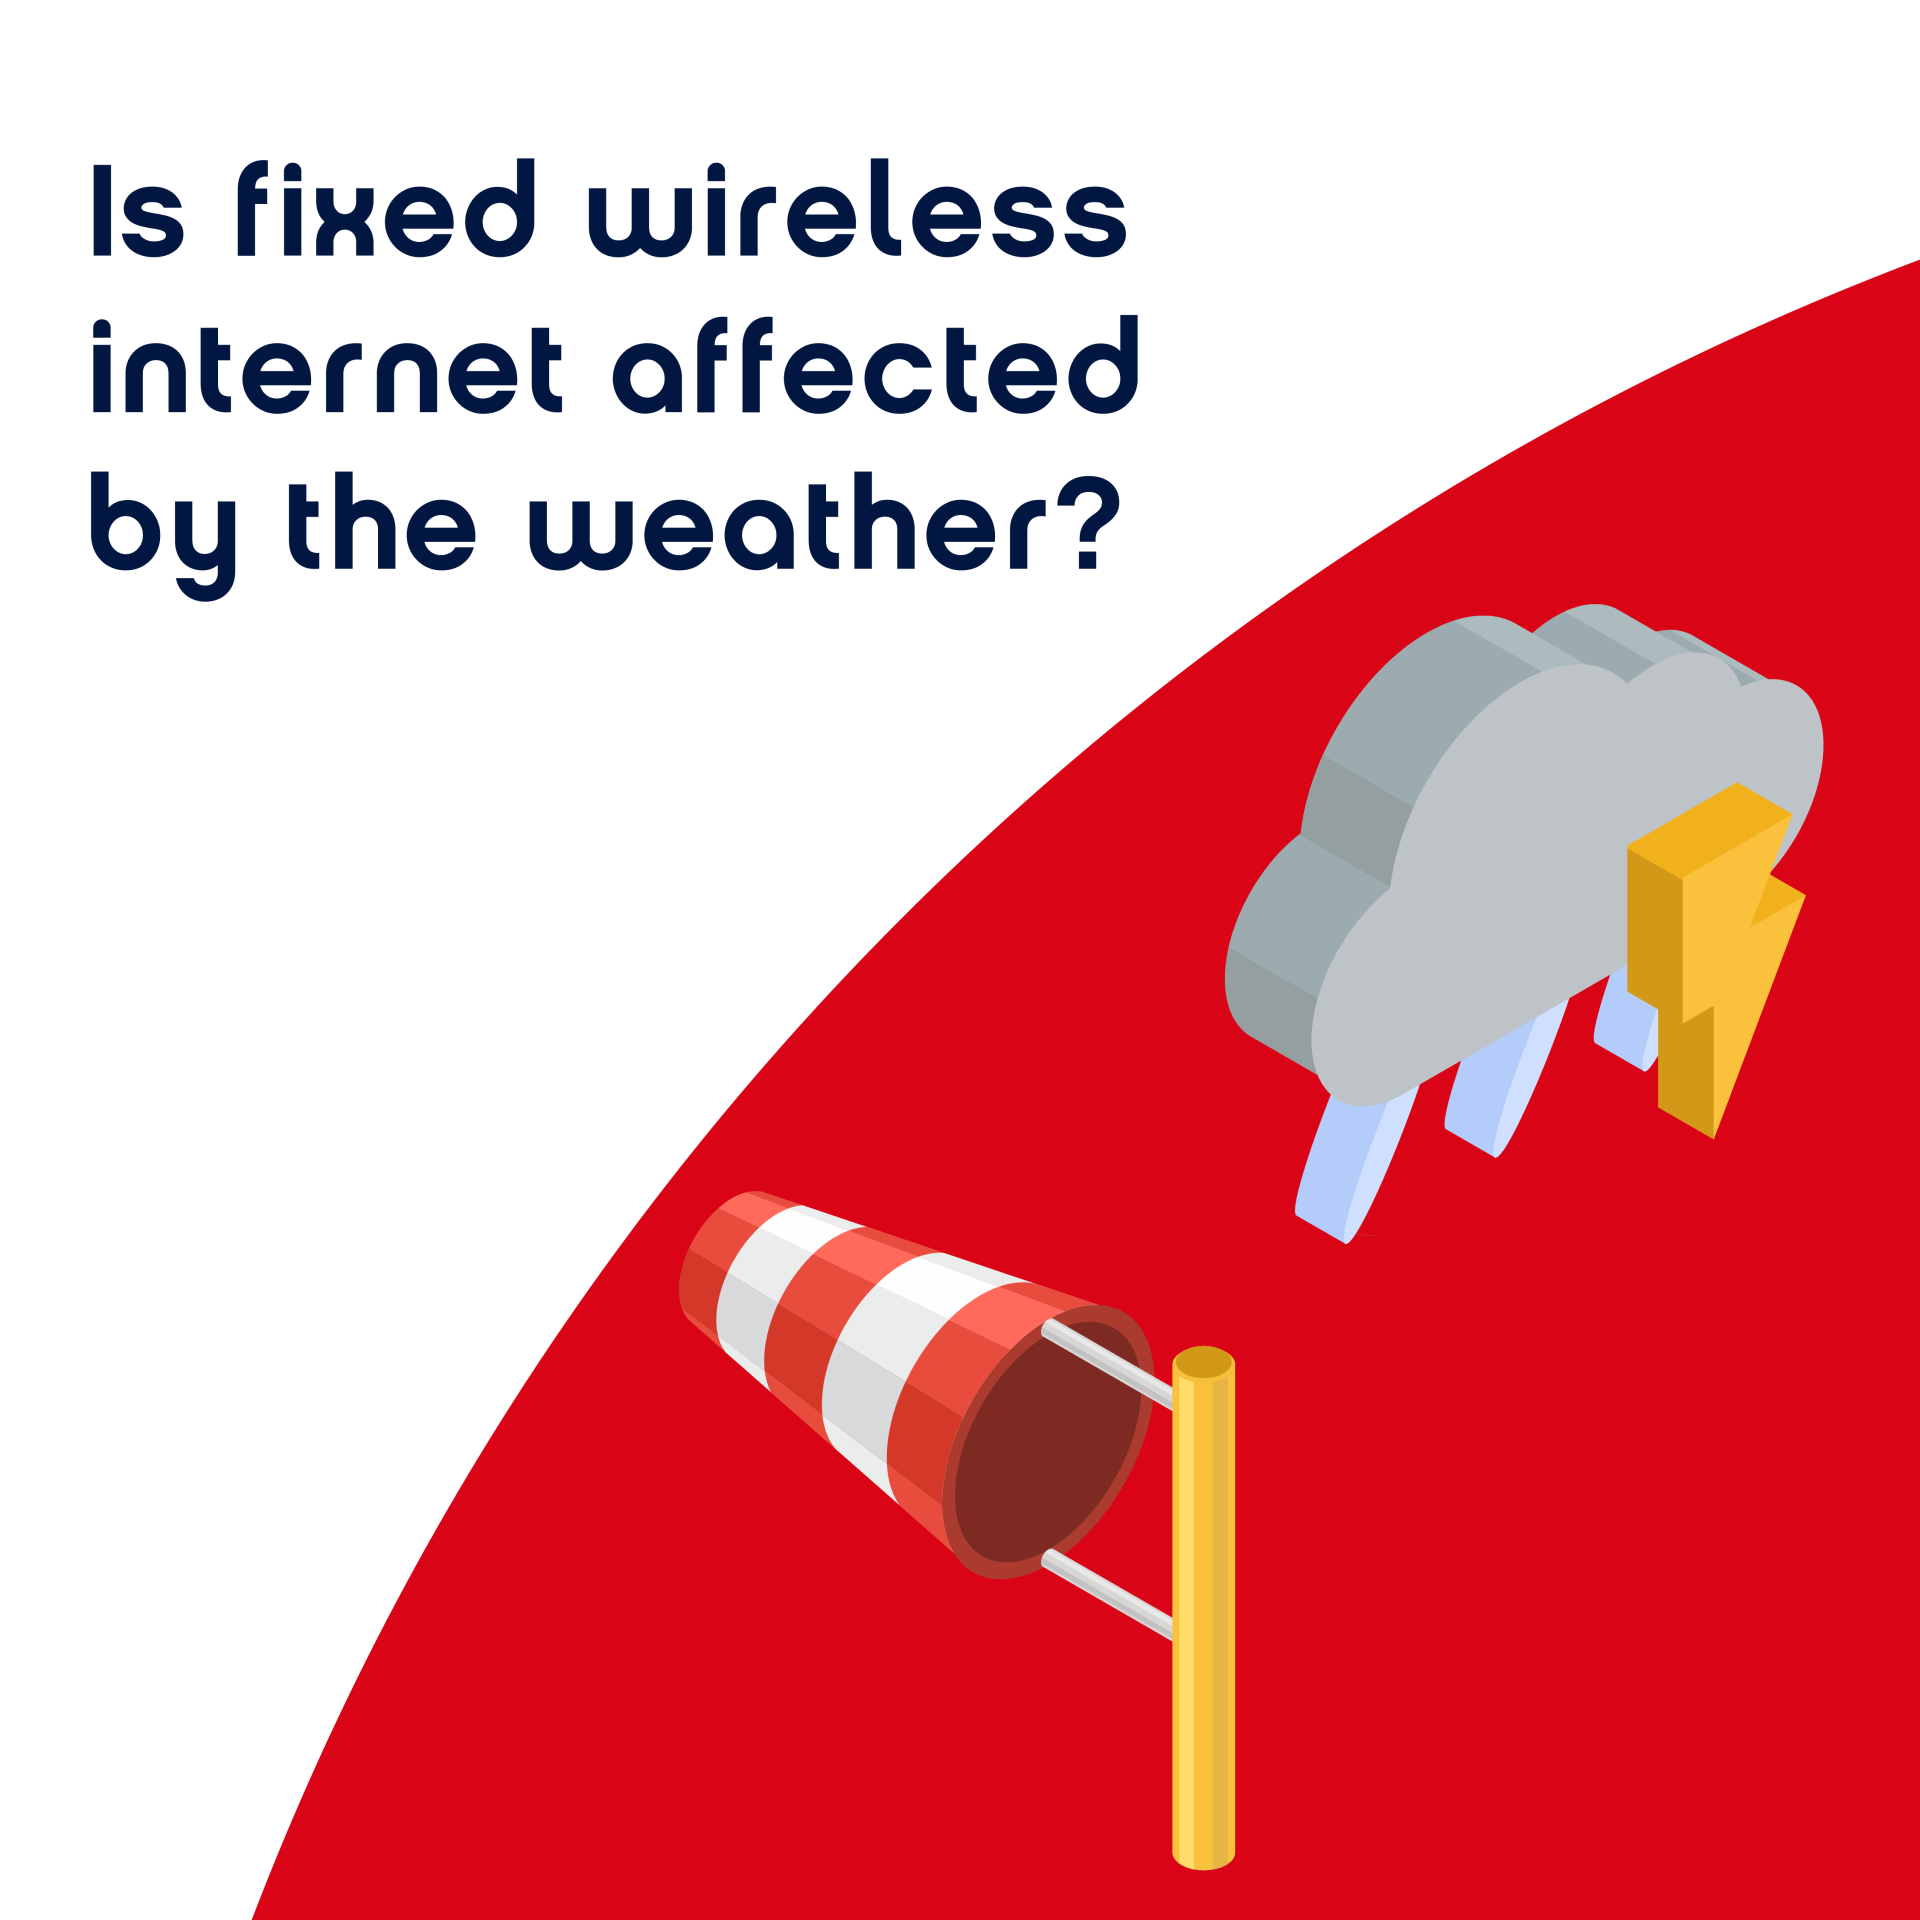 is-fixed-wireless-internet-affected-by-weather